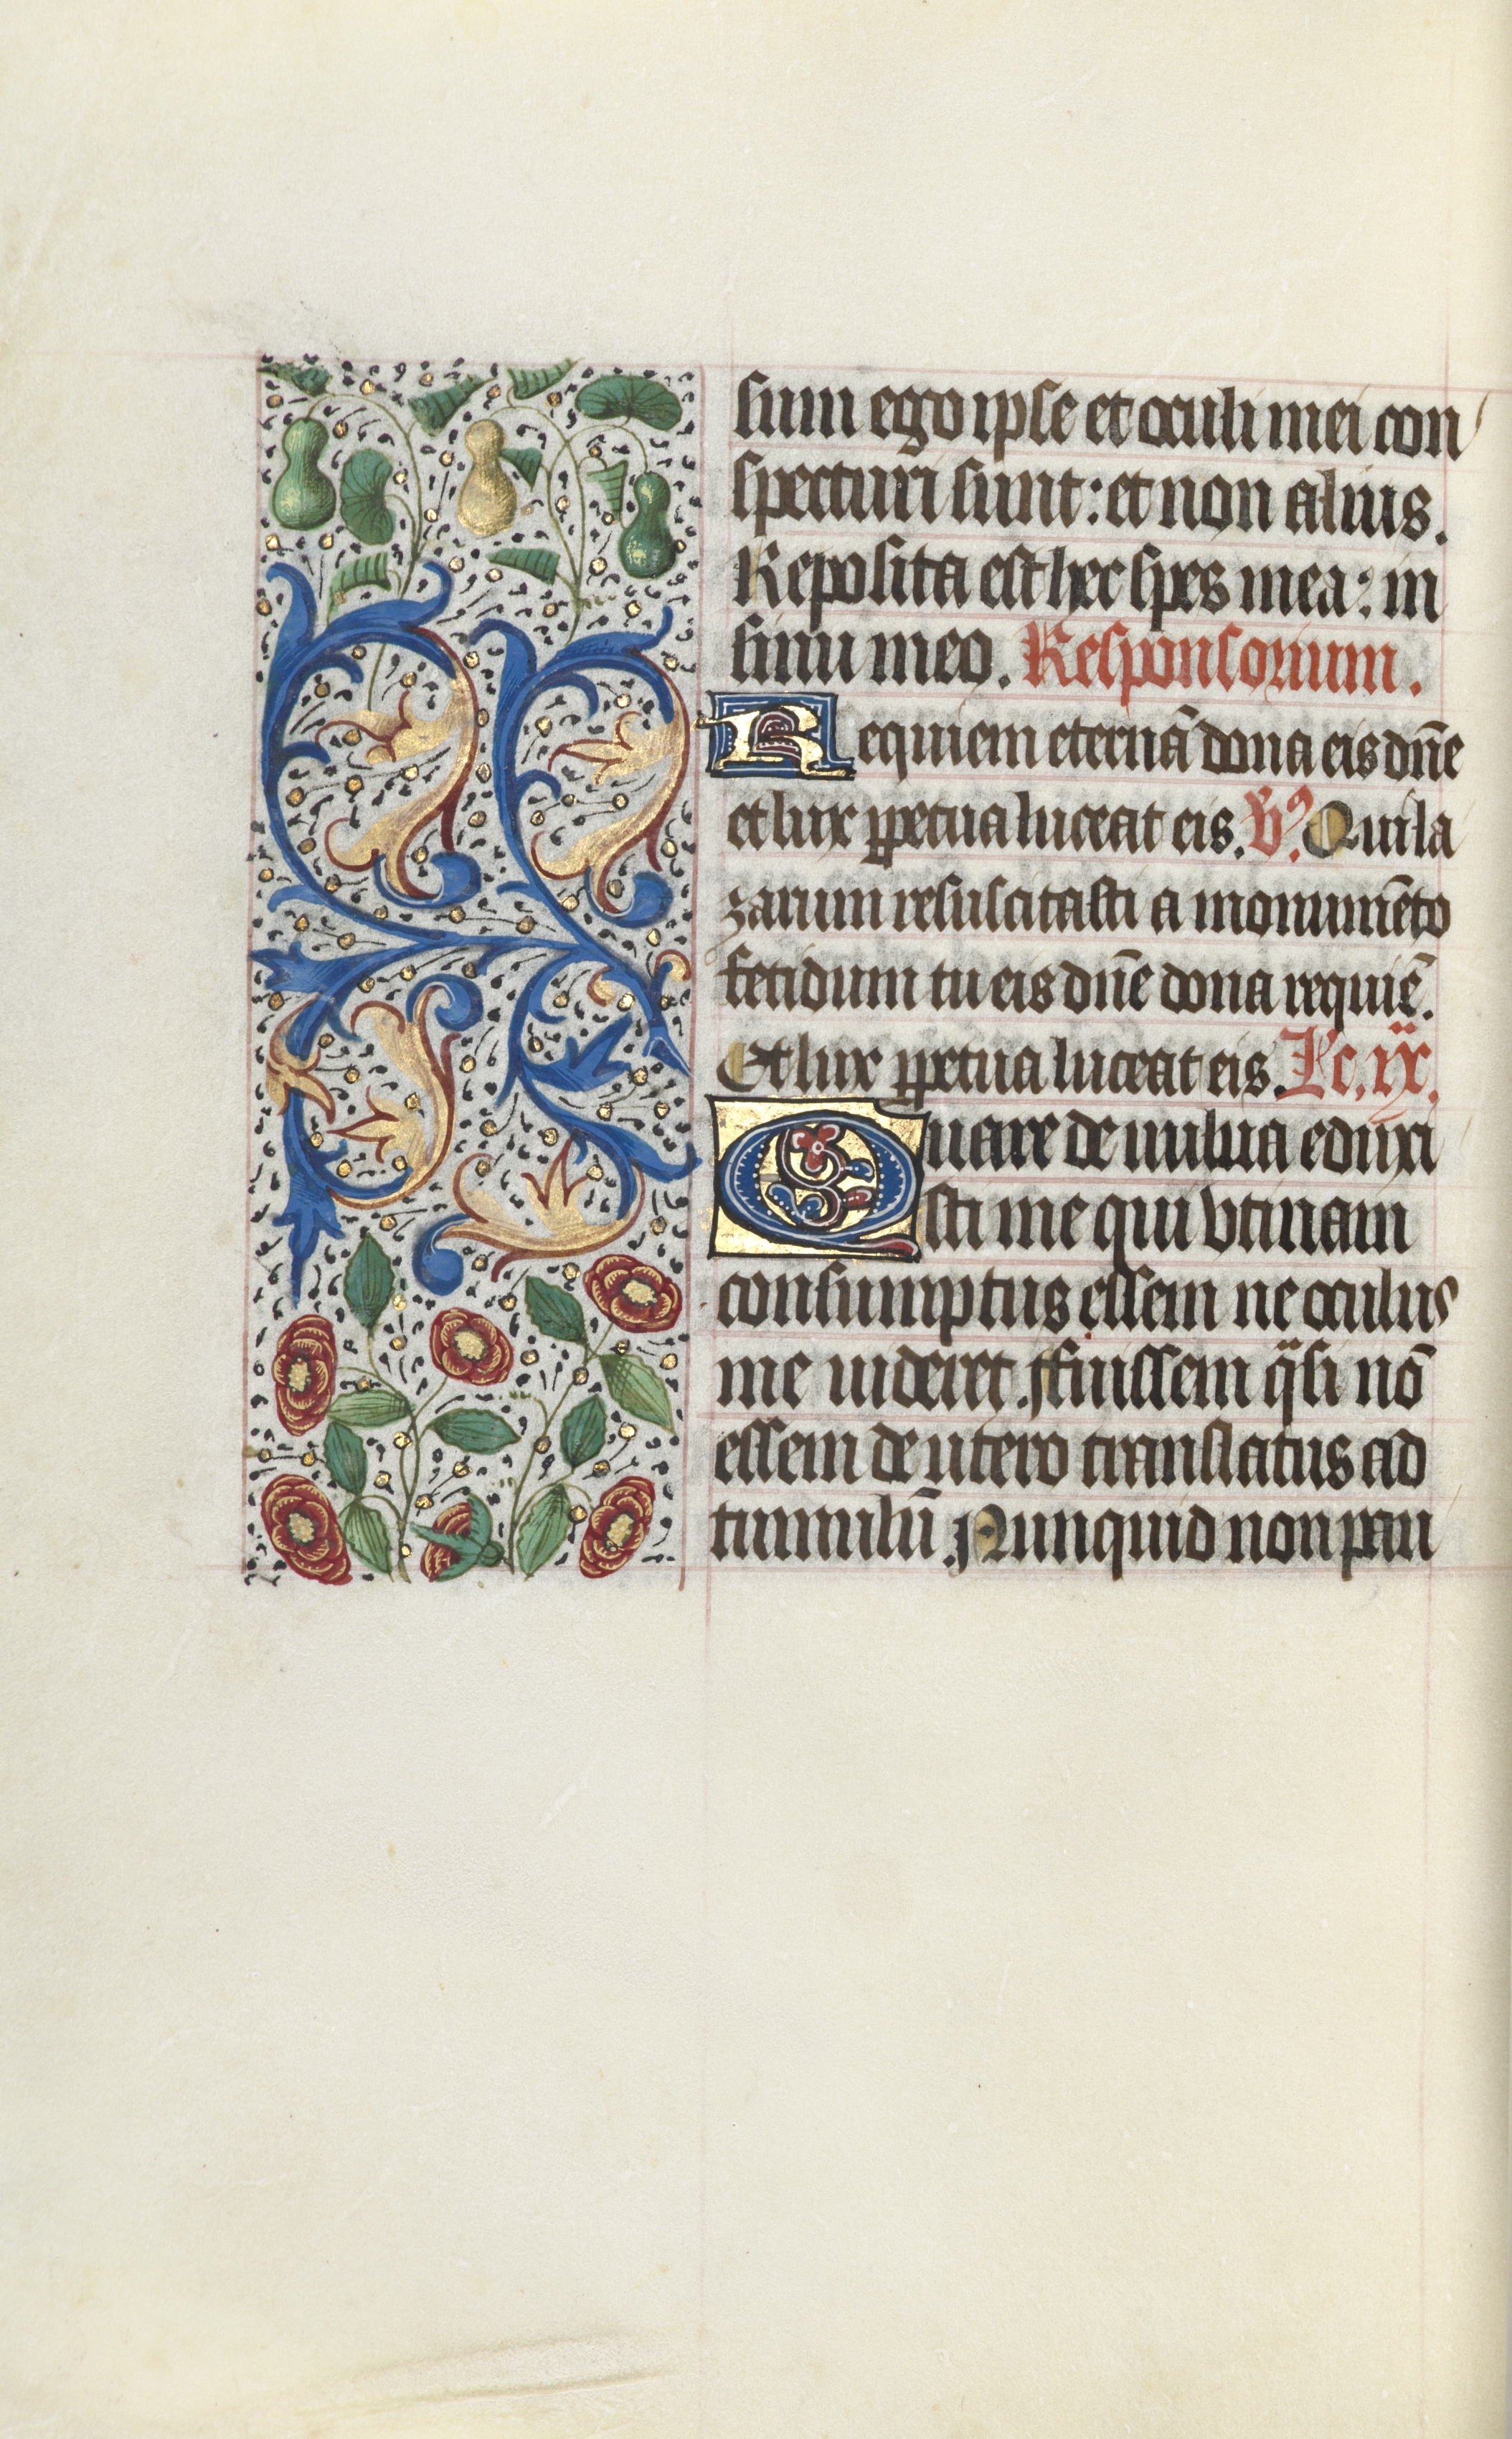 Book of Hours (Use of Rouen): fol. 132v